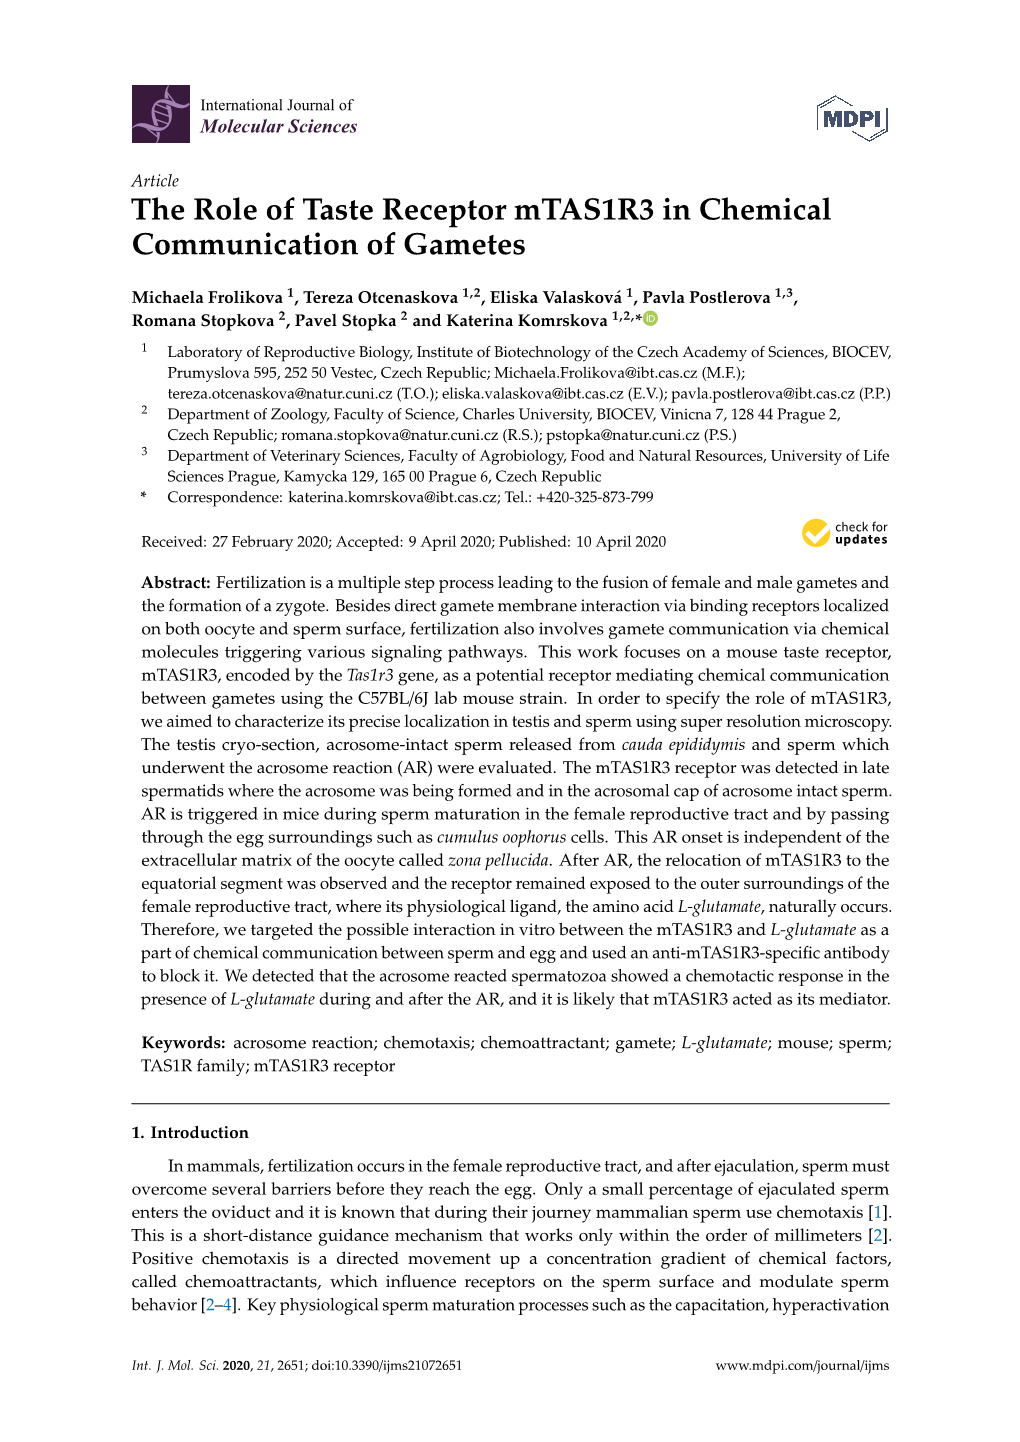 The Role of Taste Receptor Mtas1r3 in Chemical Communication of Gametes